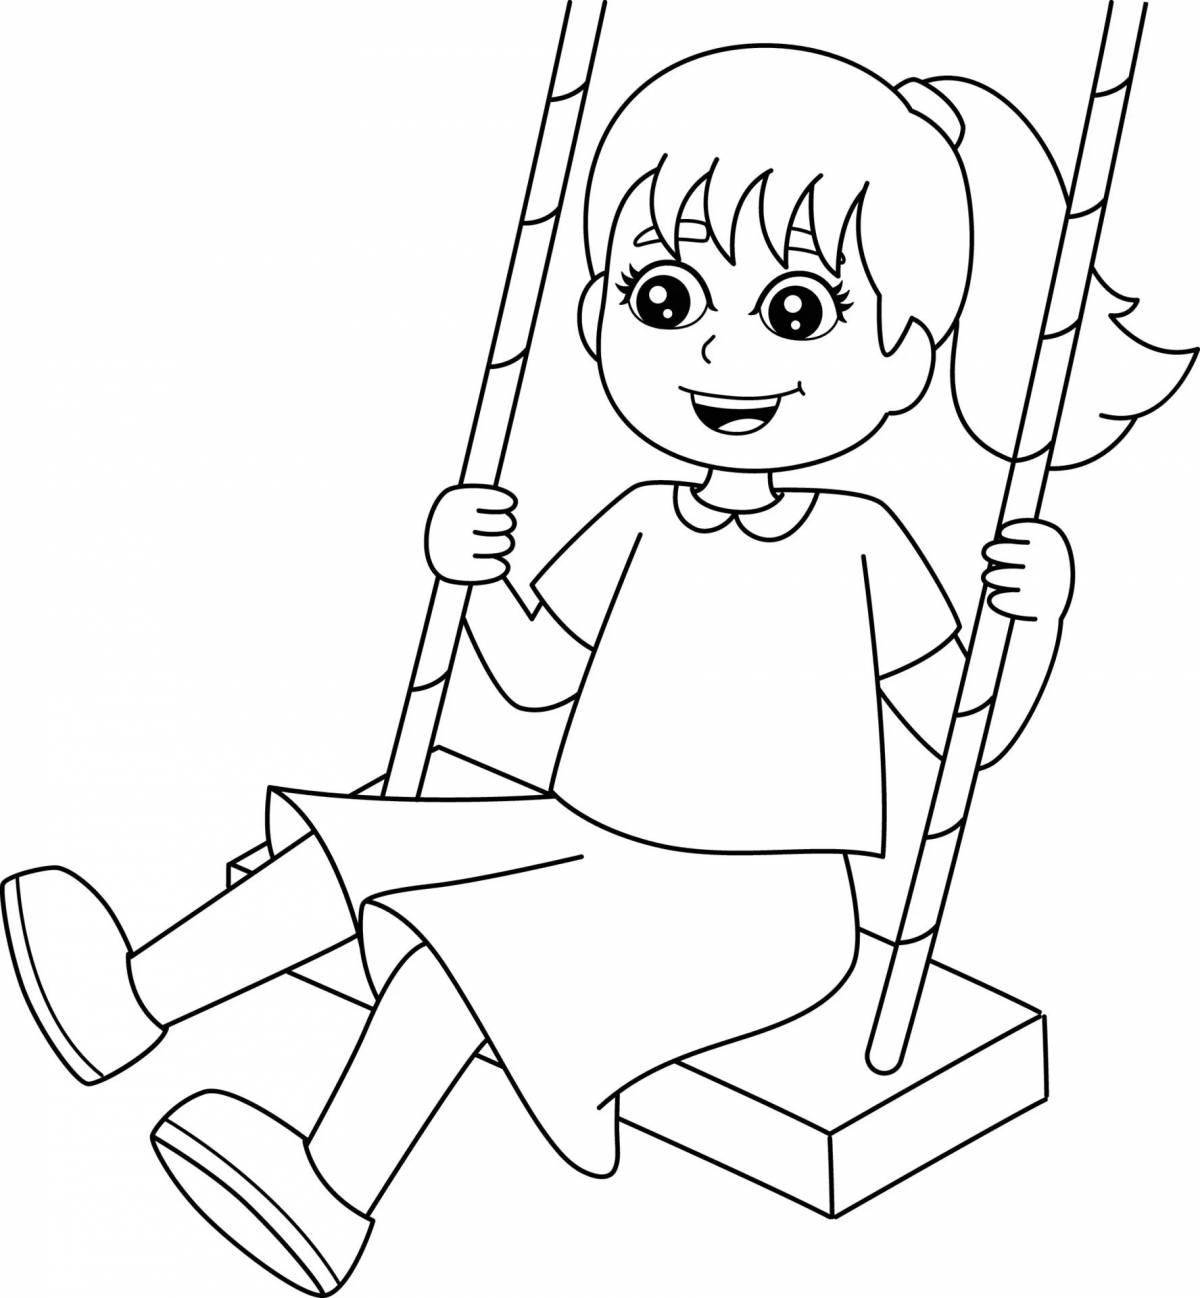 Funny girl on a swing coloring book